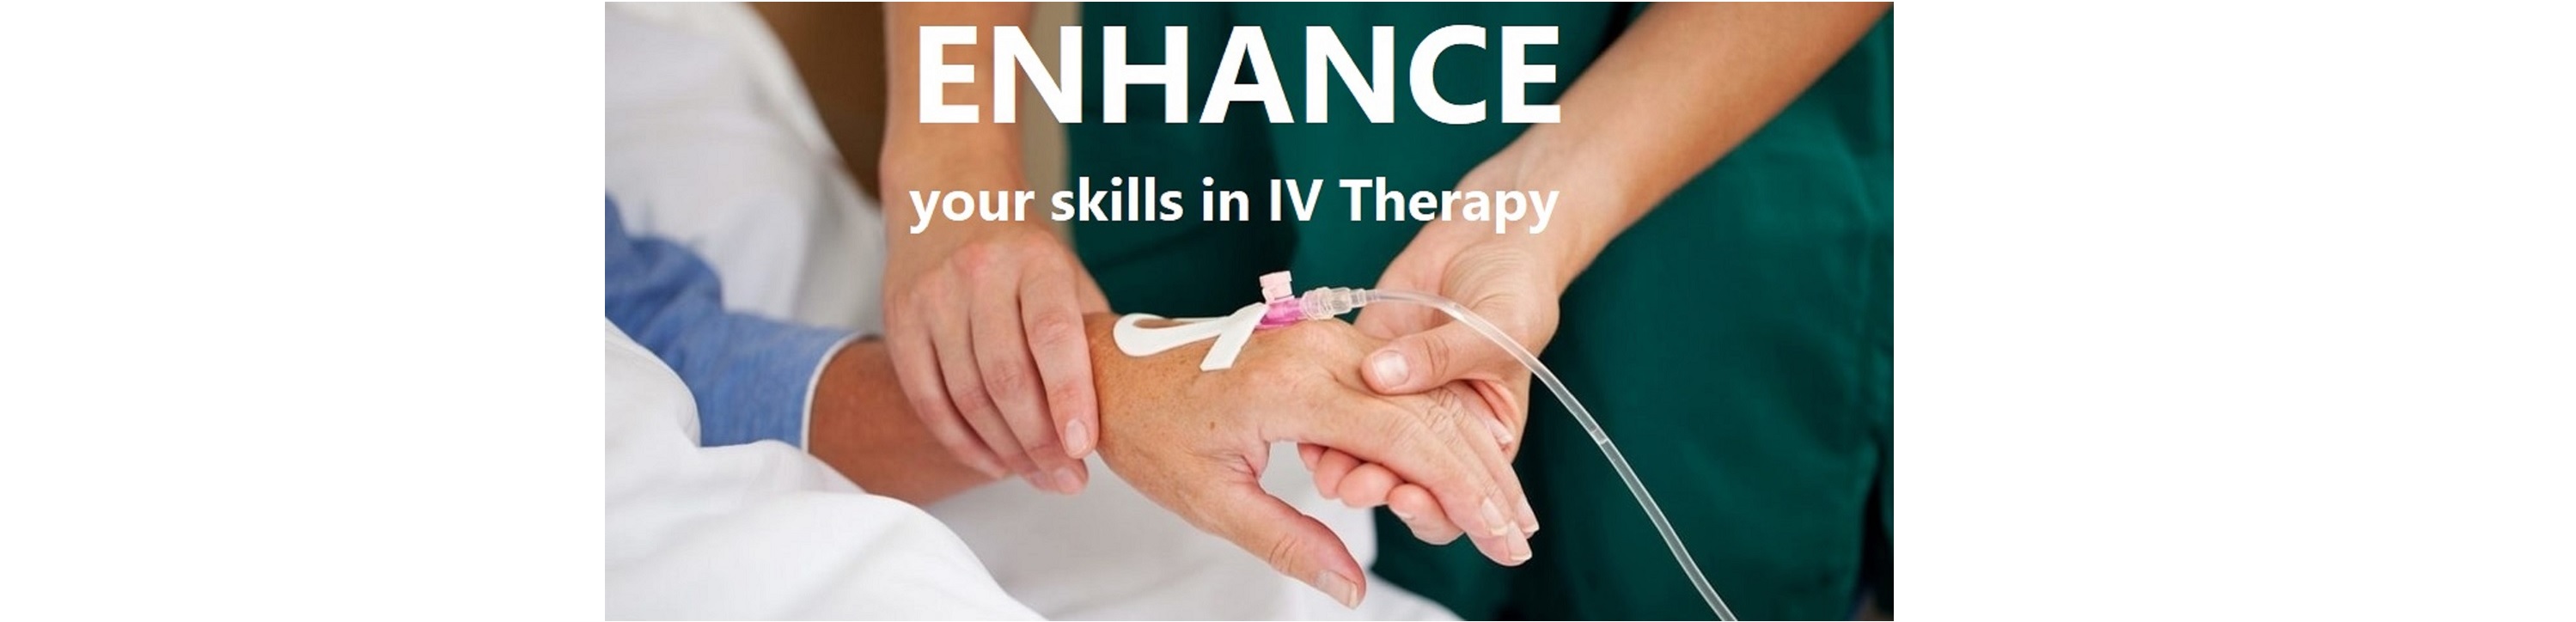 IV Therapy Course - Saturday, September 21, 2019 Banner